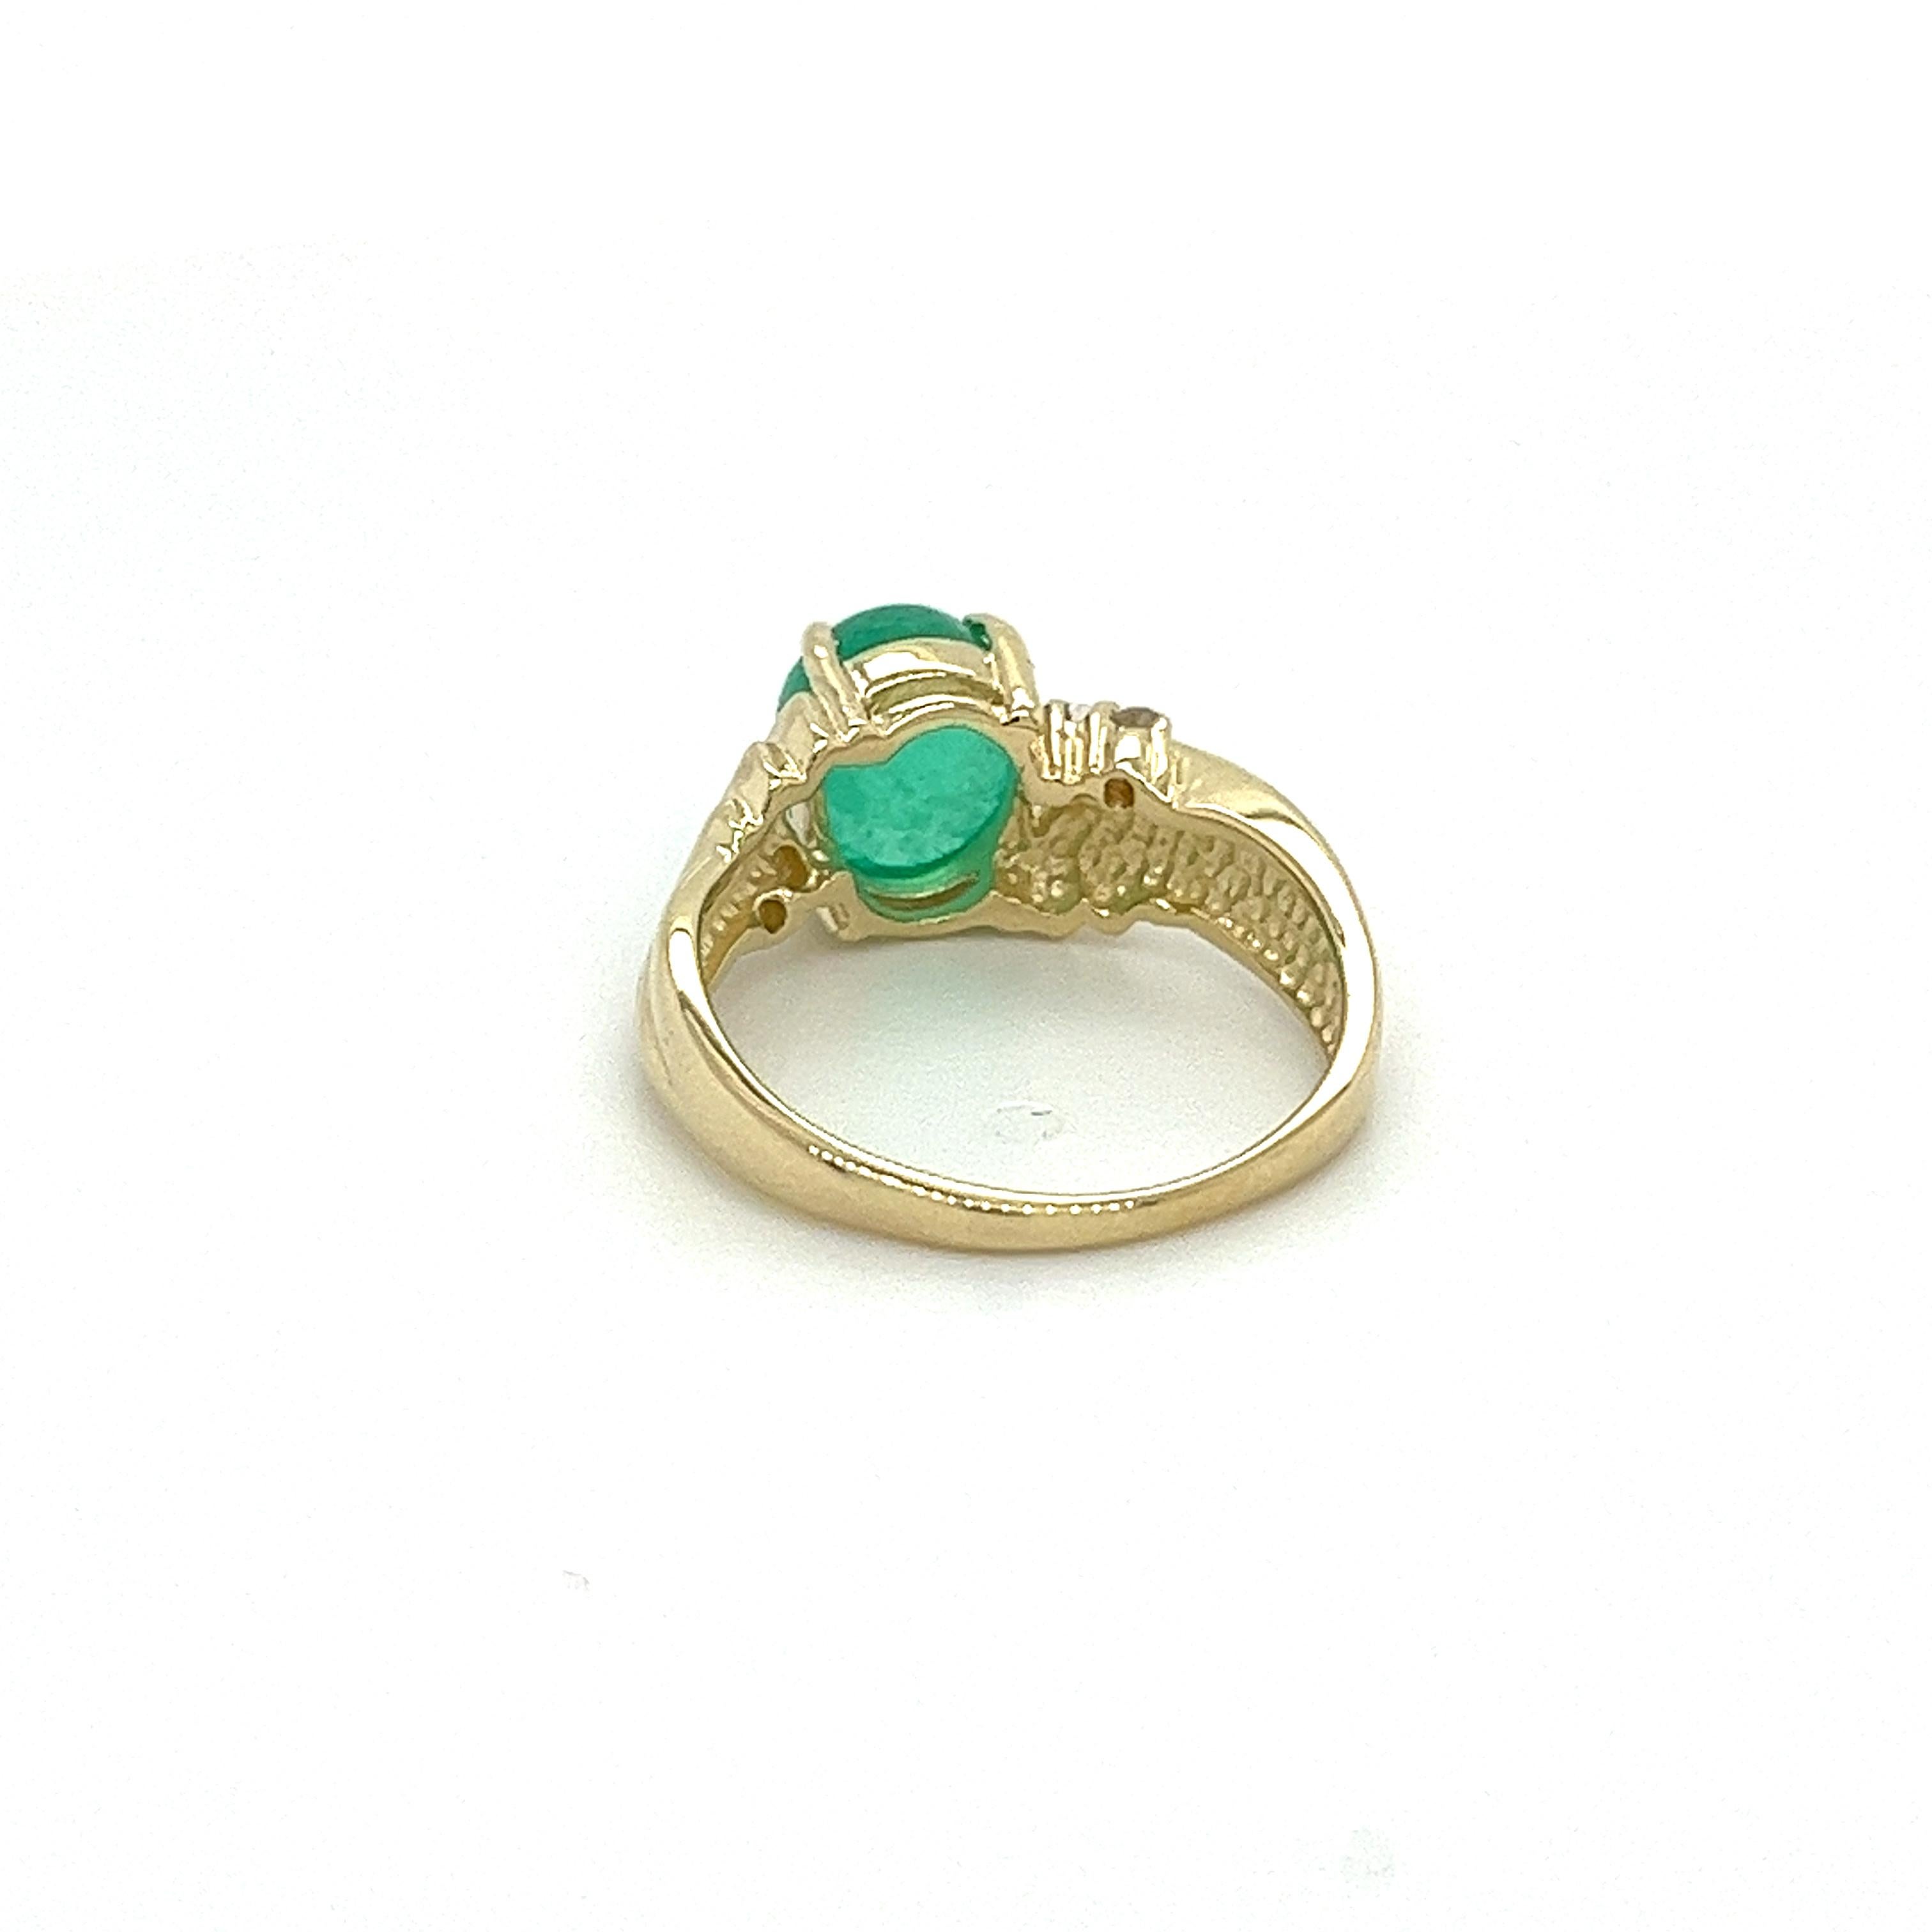 14K solid yellow gold ring, featuring a 2.0 carat cabochon cut natural emerald as the center stone. The textured ring showcases a 4.5mm width band with a textured shank and sharp geometric pattern. A mesmerizing emerald, with its lush green color